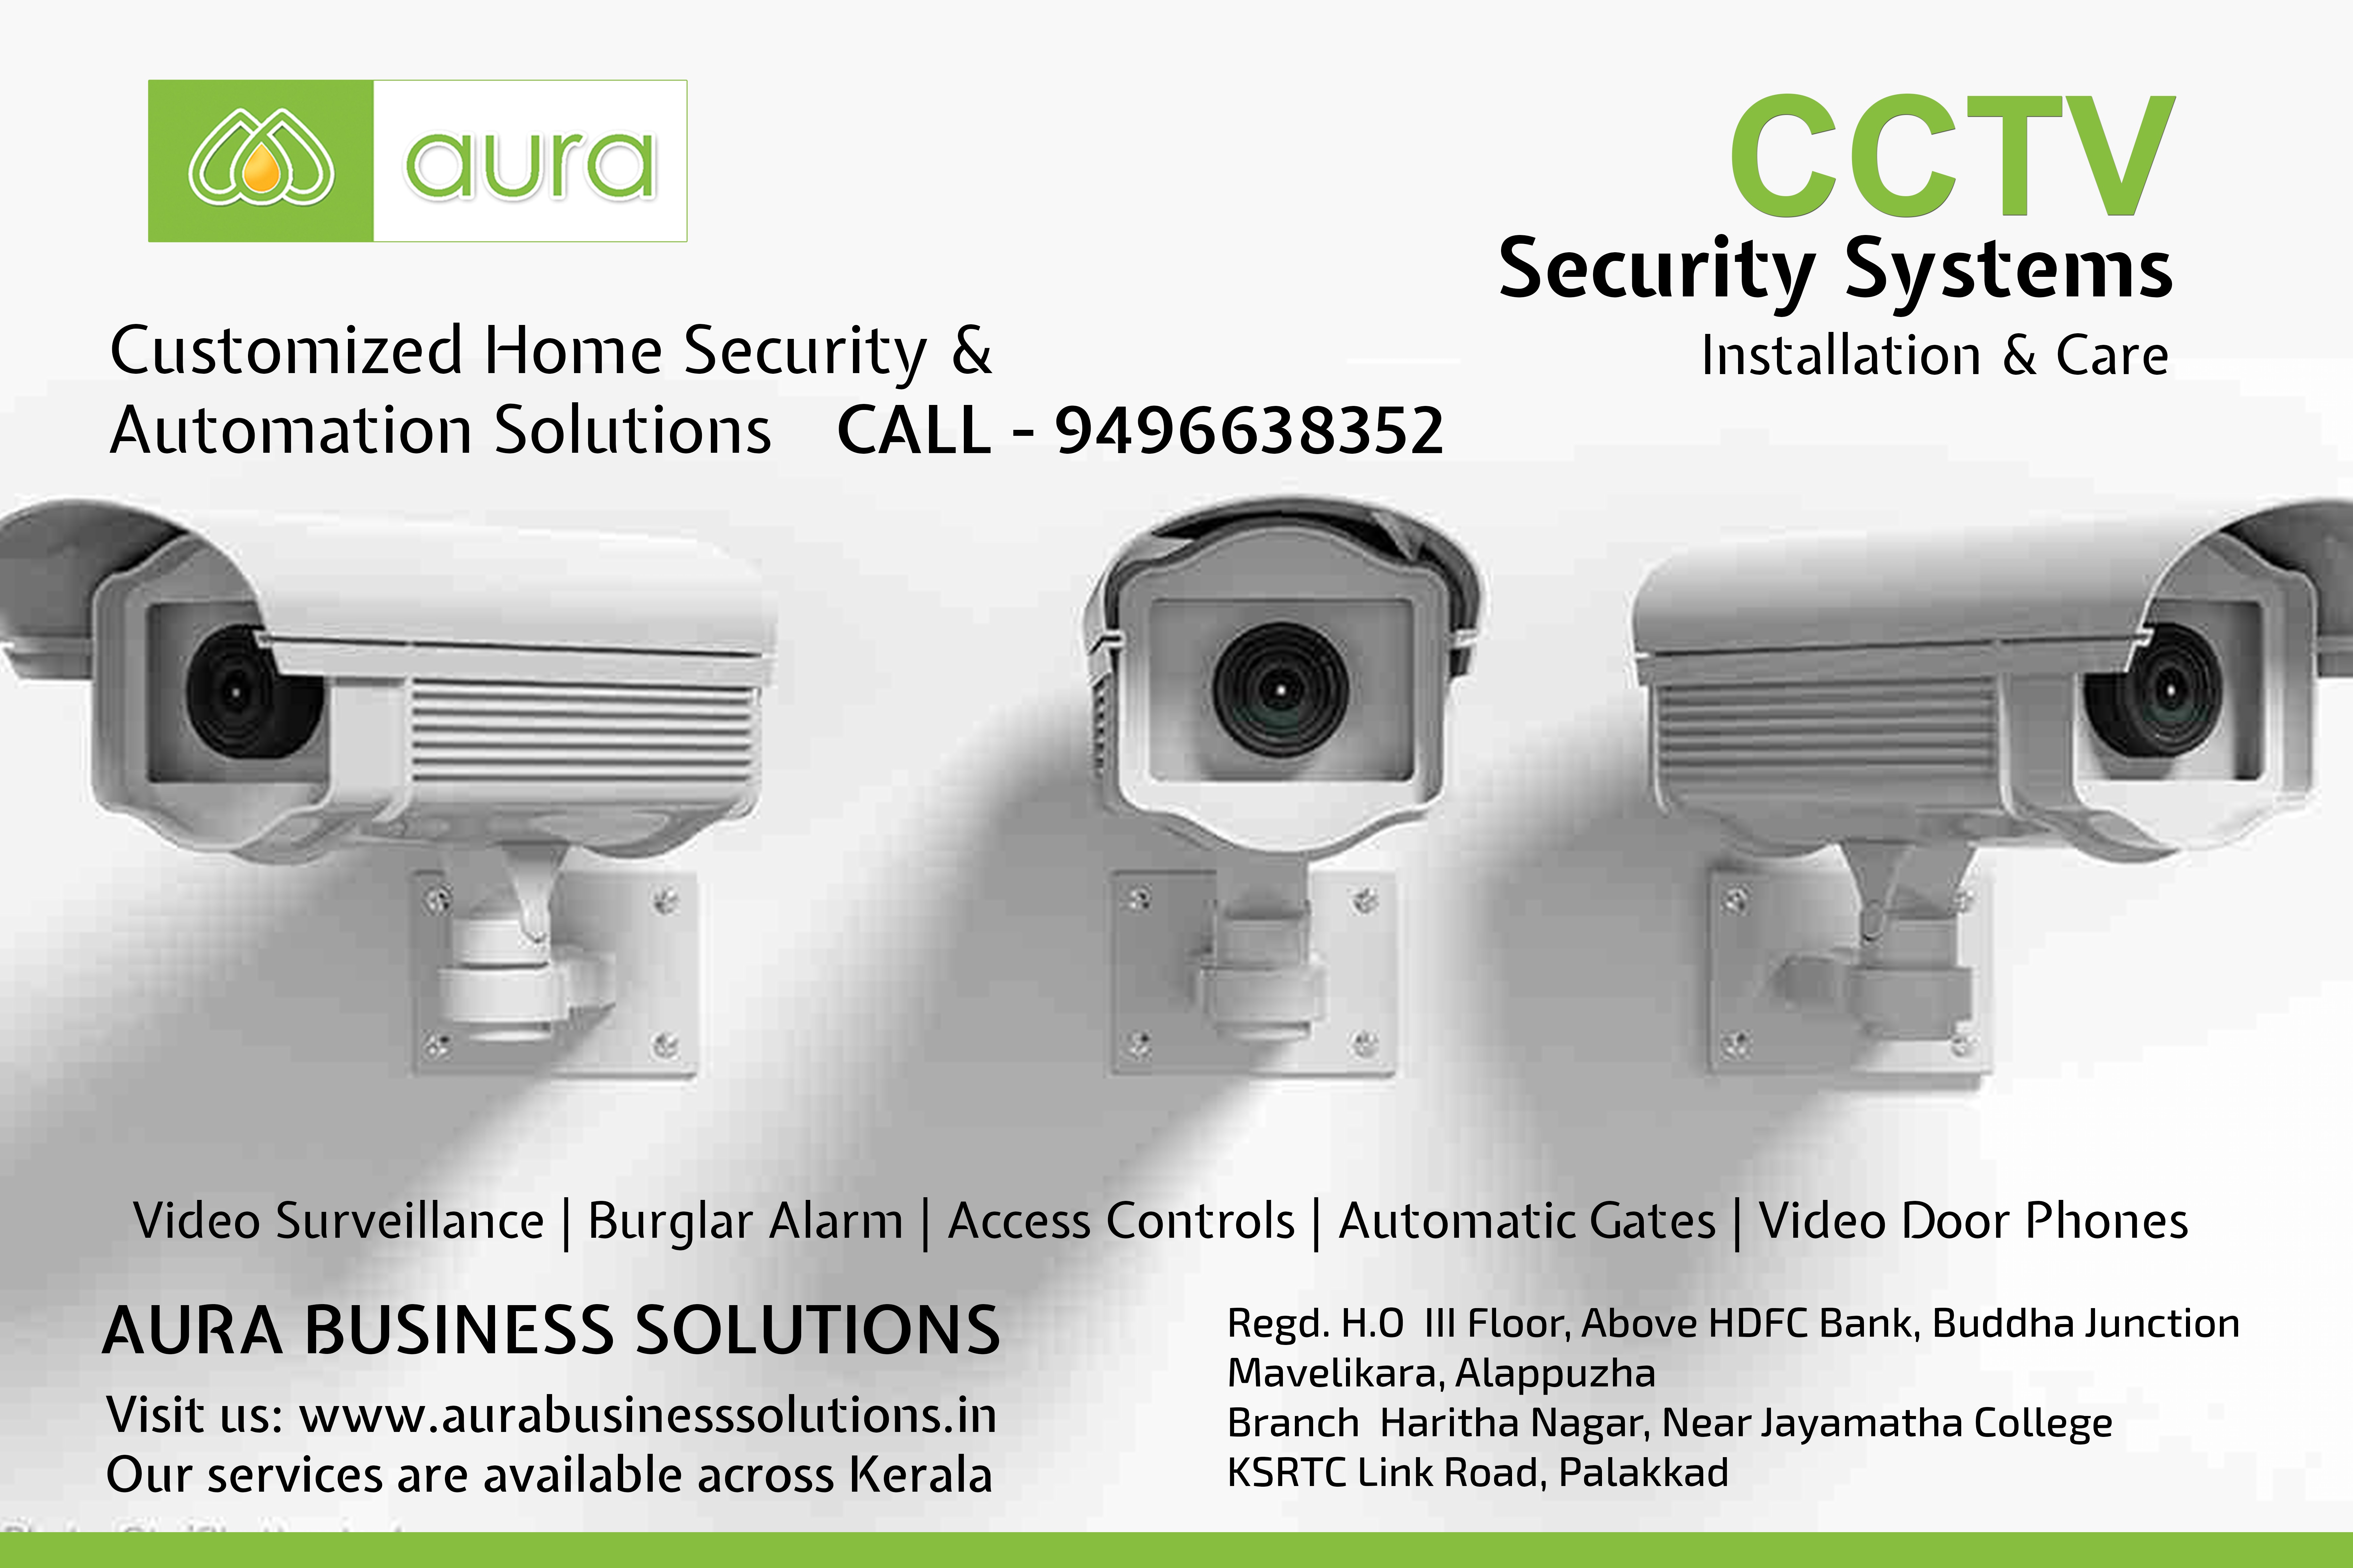 Aura Business Solutions in Coimbatore